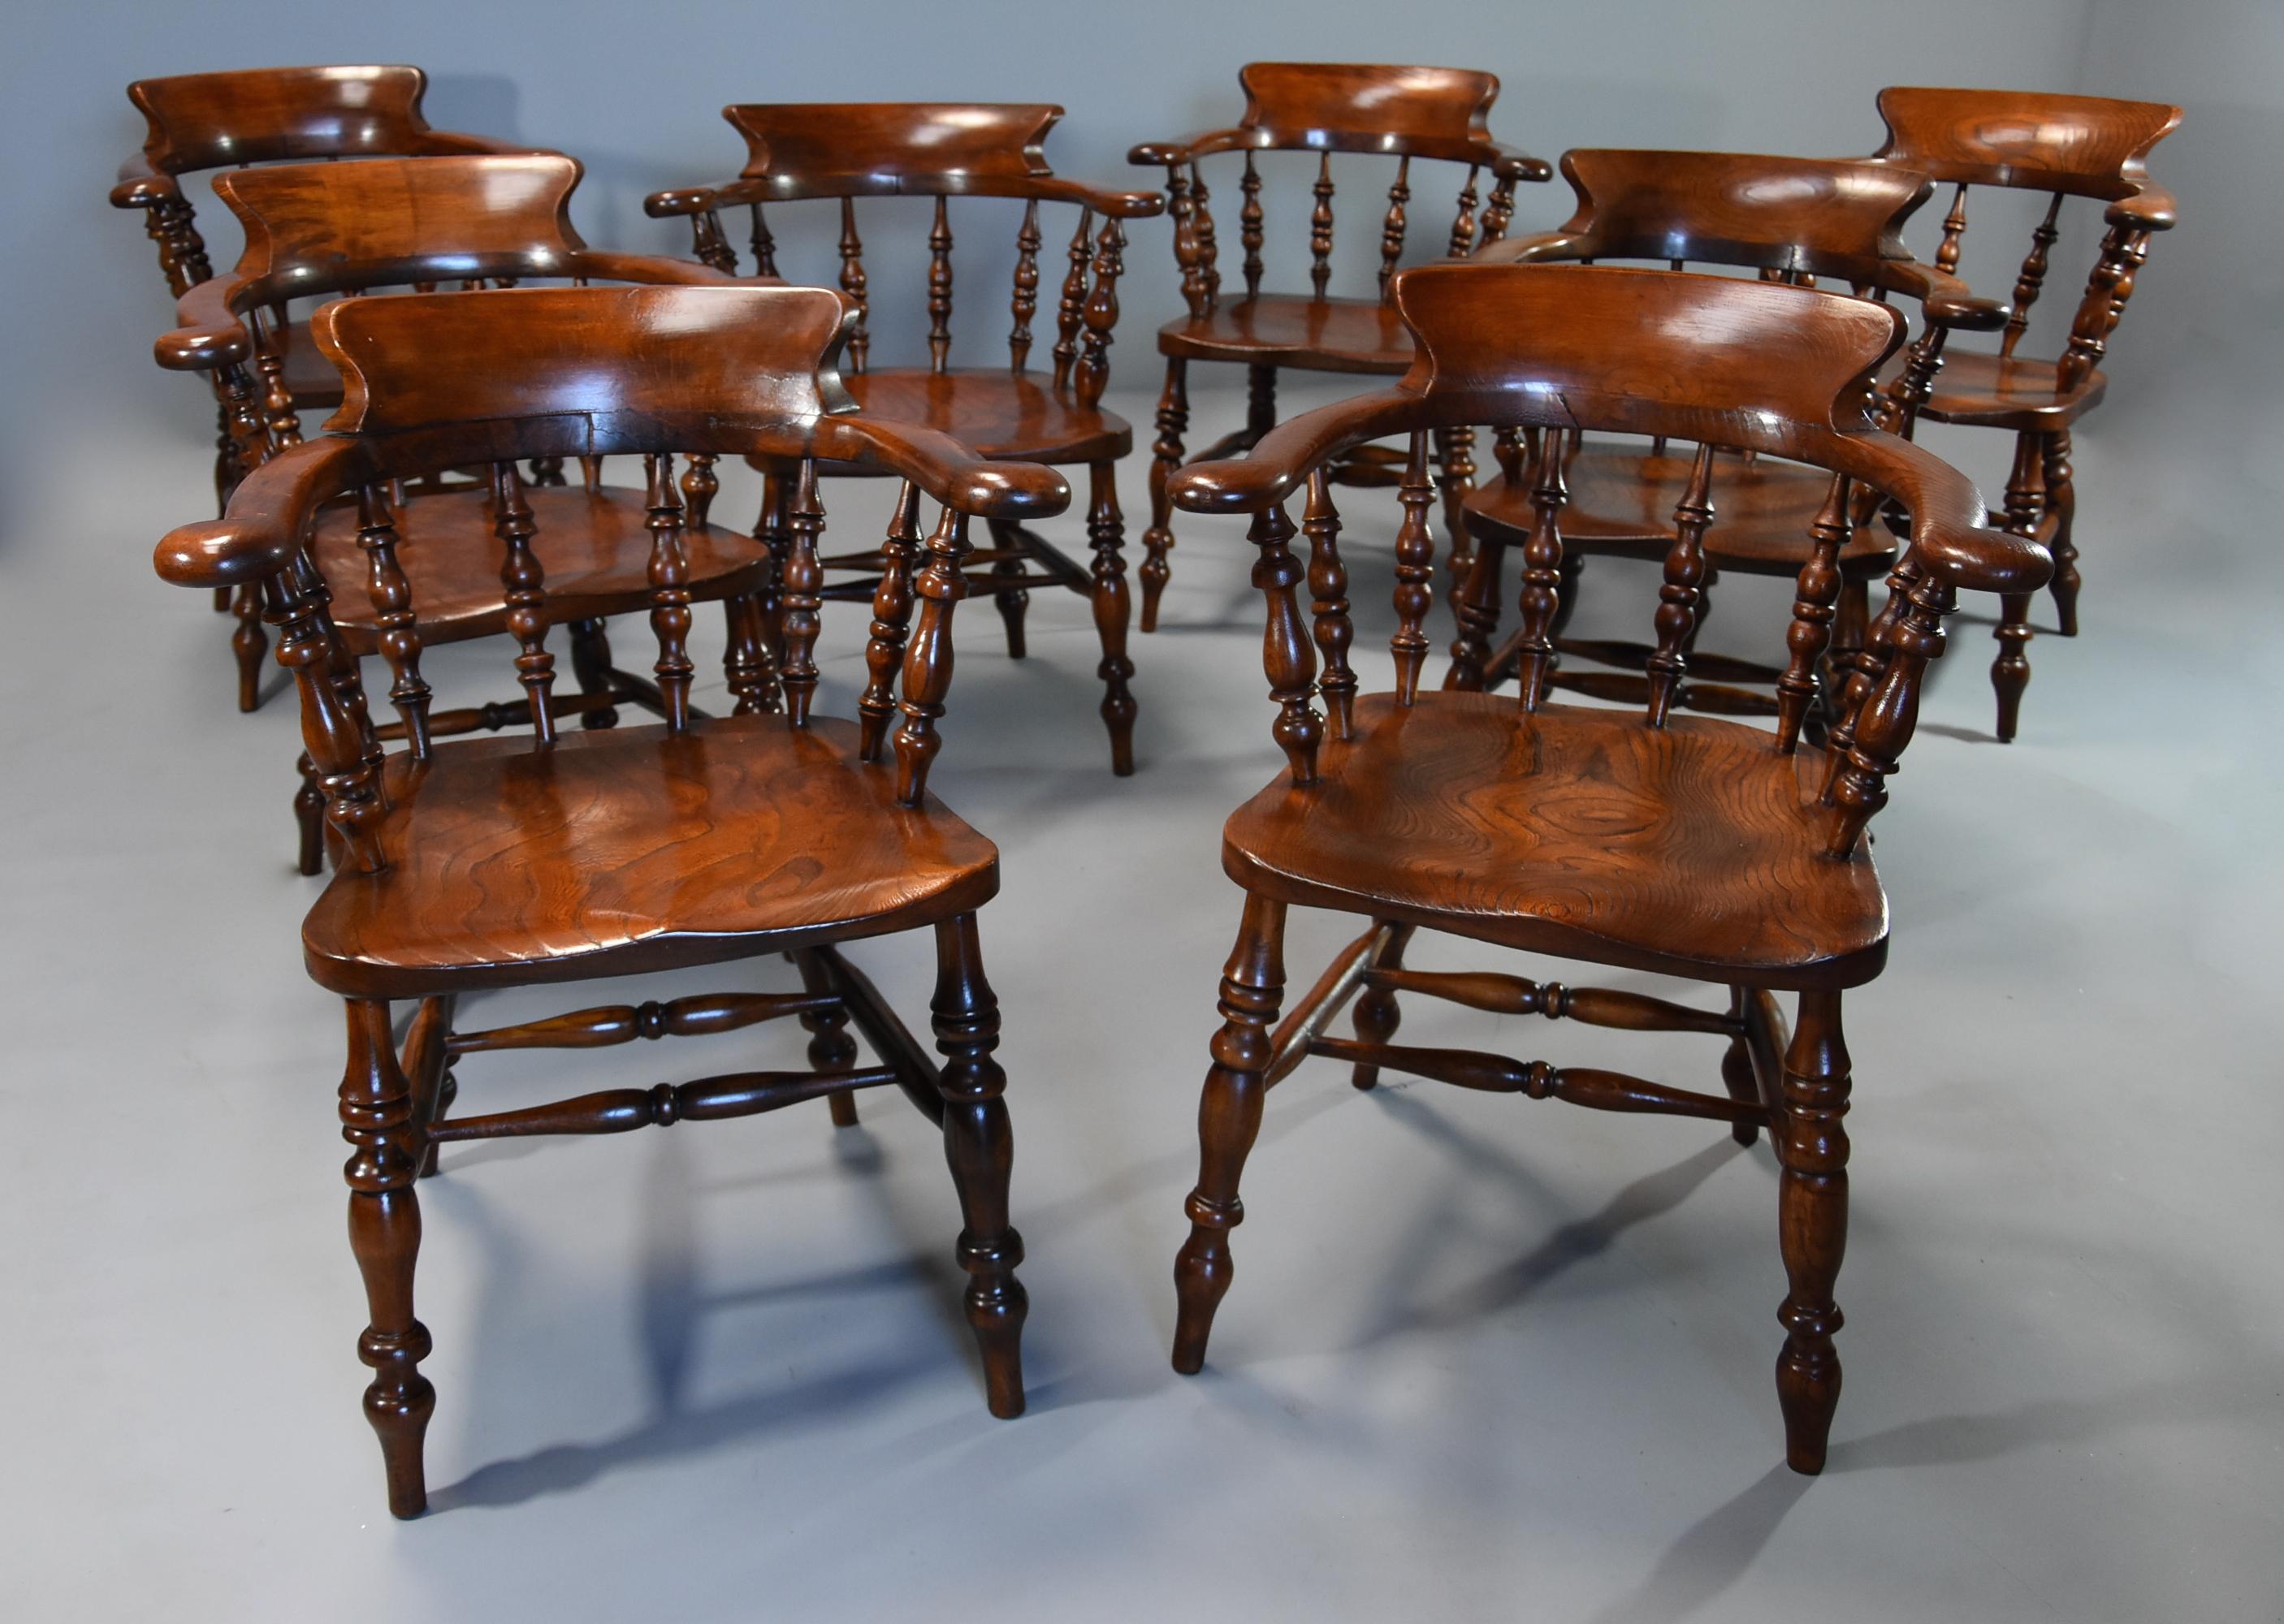 A large set of eight mid-19th century smokers bow Windsor chairs or office chairs.

This set of chairs are constructed from of a variety of woods including ash, elm and beech.

The chairs consist of a deep, shaped back support leading down to